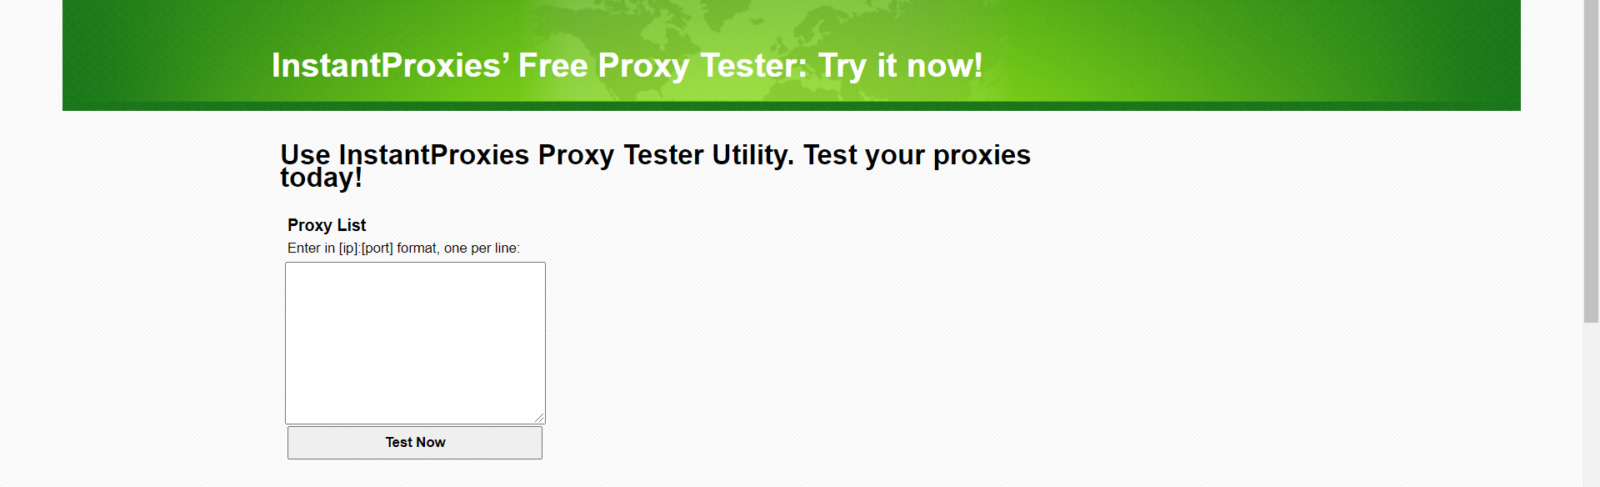 Instant Proxies free proxy tester